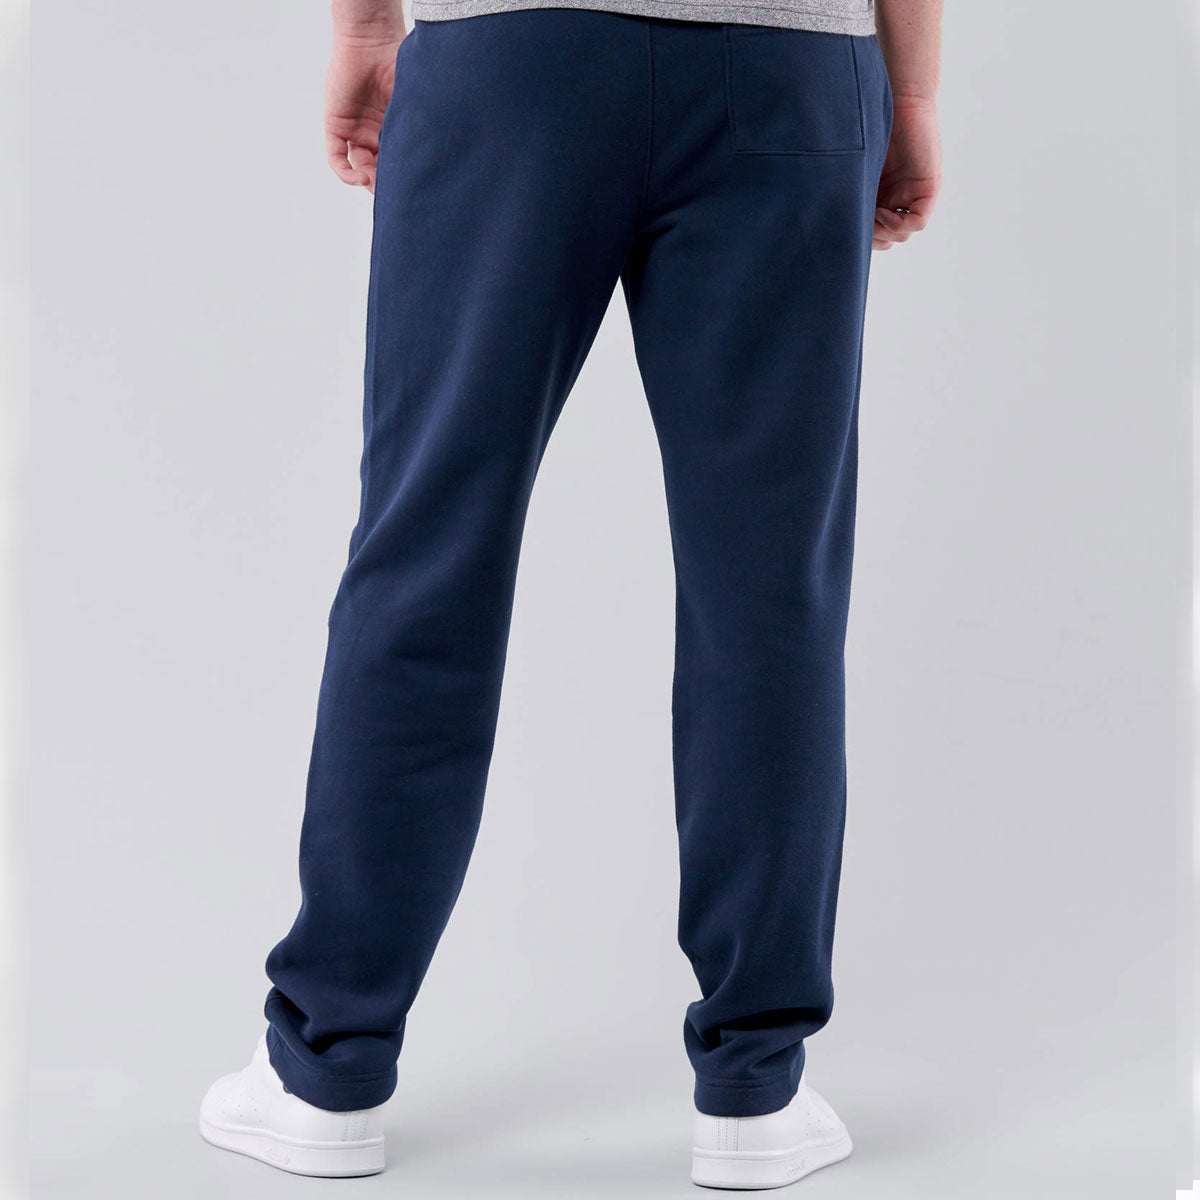 US PLO SMOOTH NAVY TROUSER